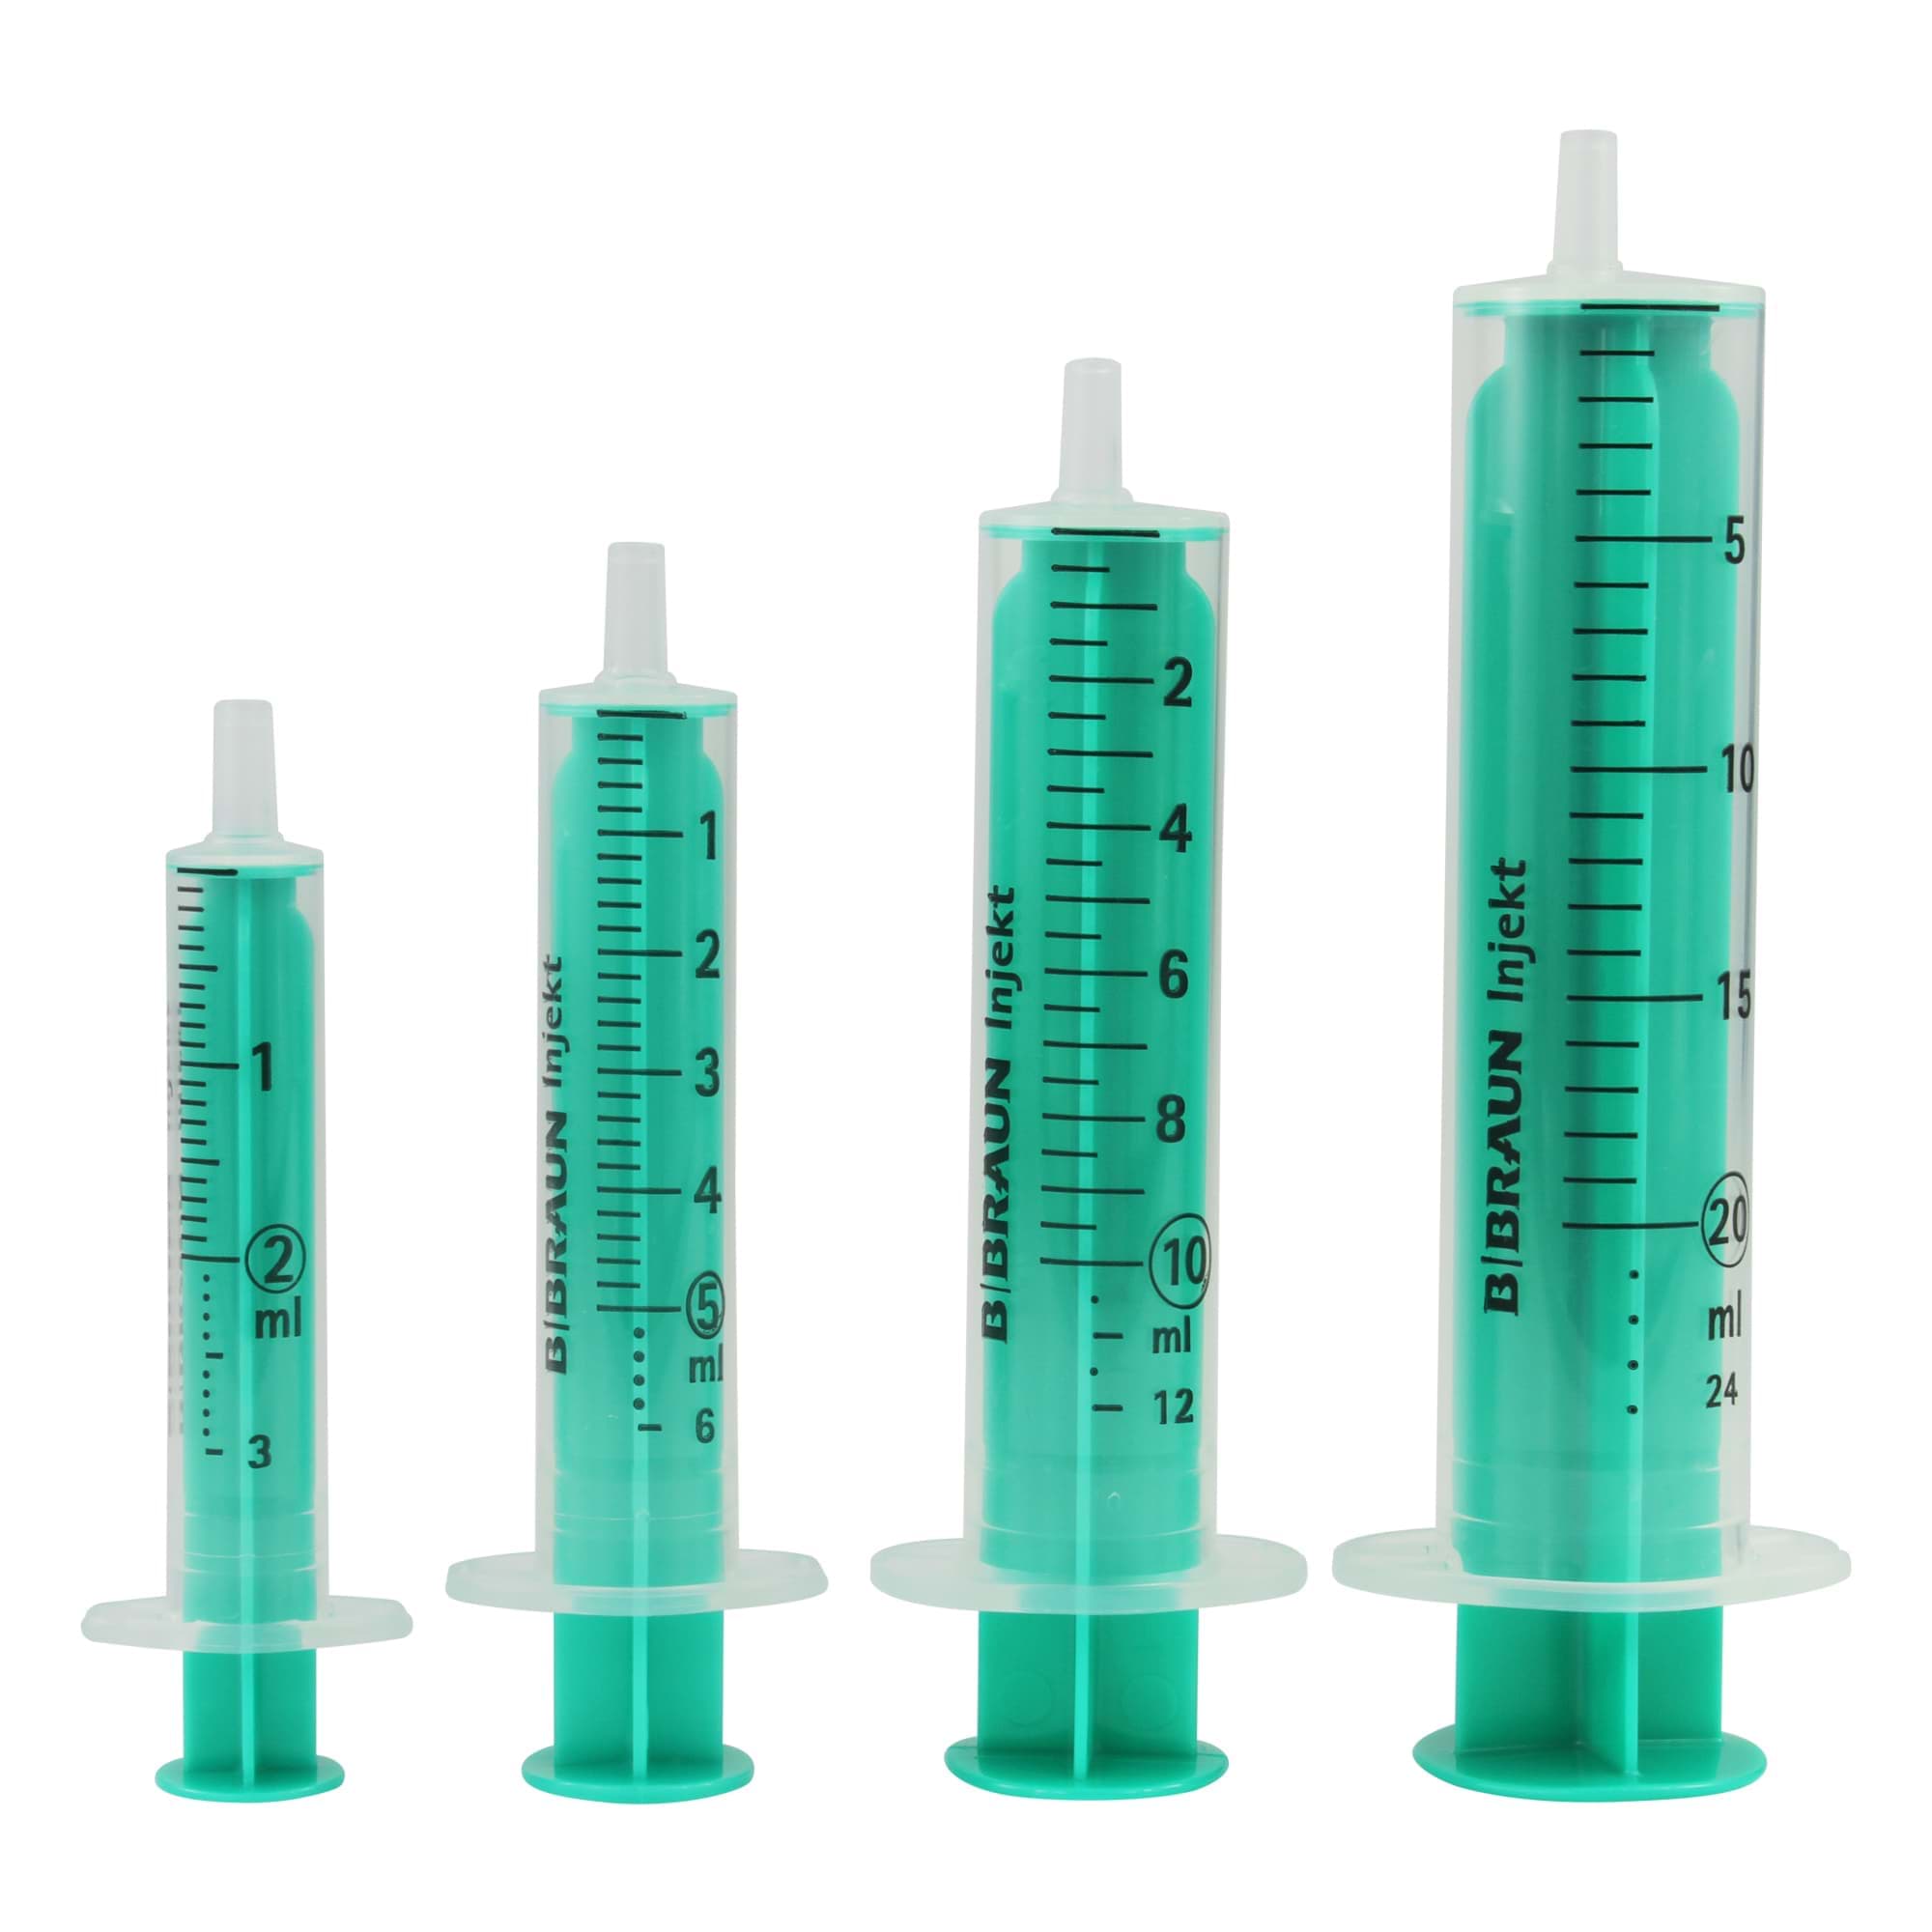 Picture for category Disposable Syringes